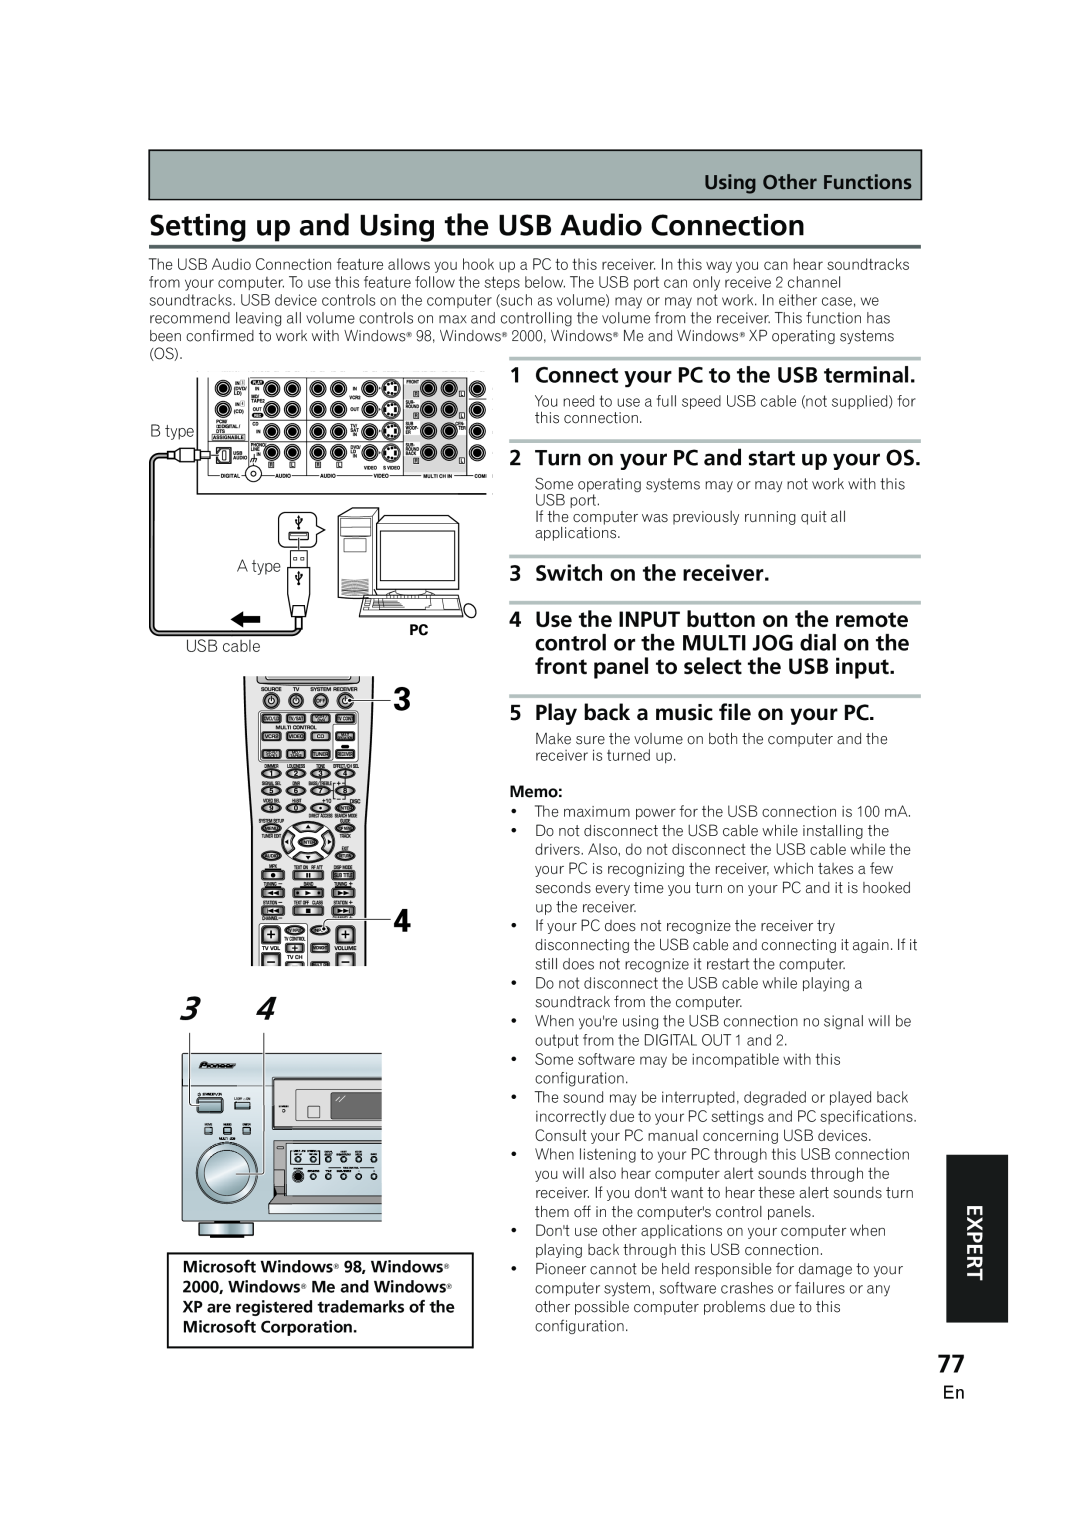 Pioneer VSX-AX5i-G manual Setting up and Using the USB Audio Connection, Expert 